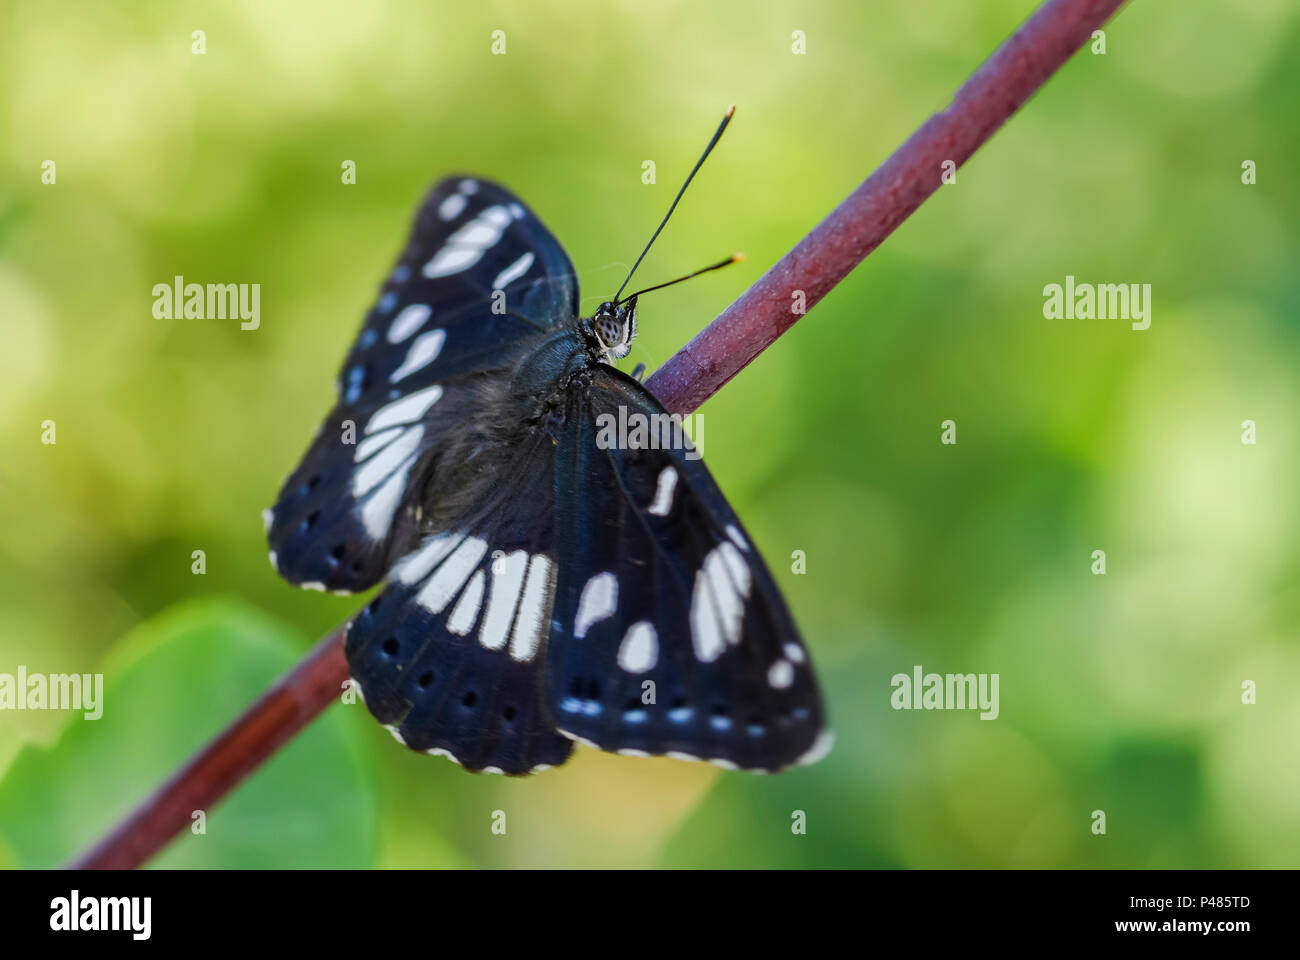 Southern White Admiral butterfly - Limenitis reducta, beautiful colorful butterfly from European meadows and grasslands. Stock Photo